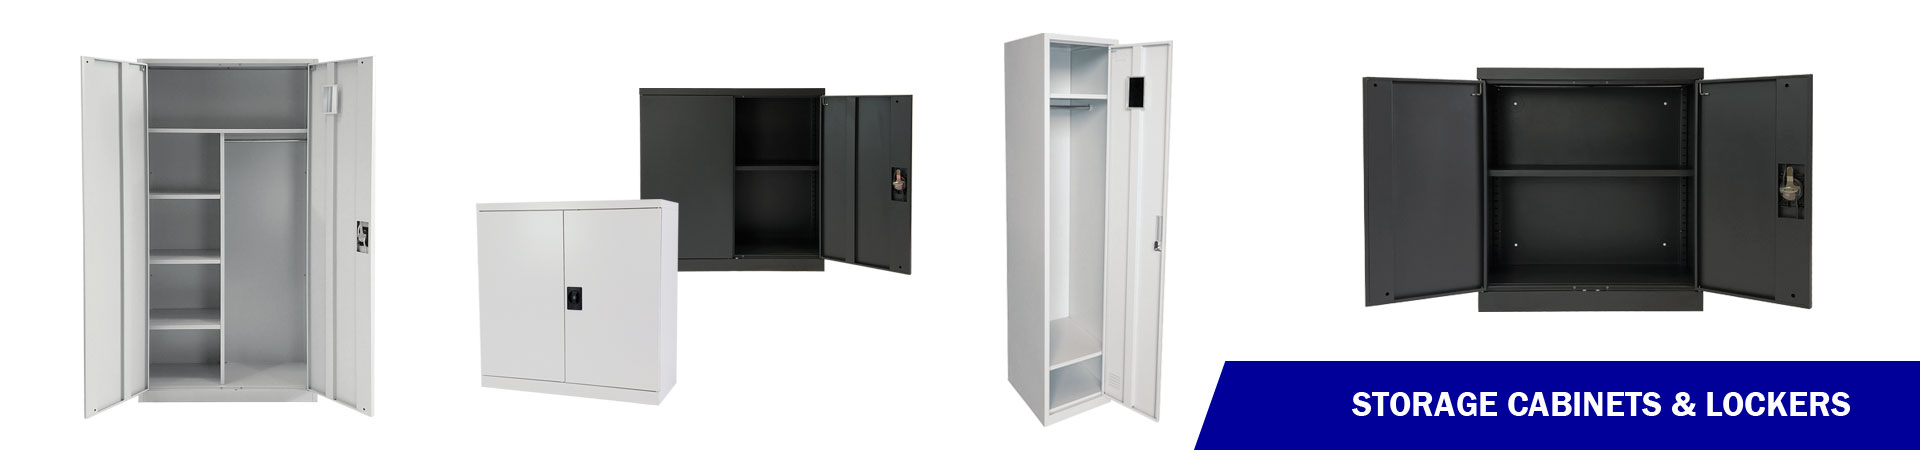 Shop the range of storage cabinets and lockers at Shed&Shelving!